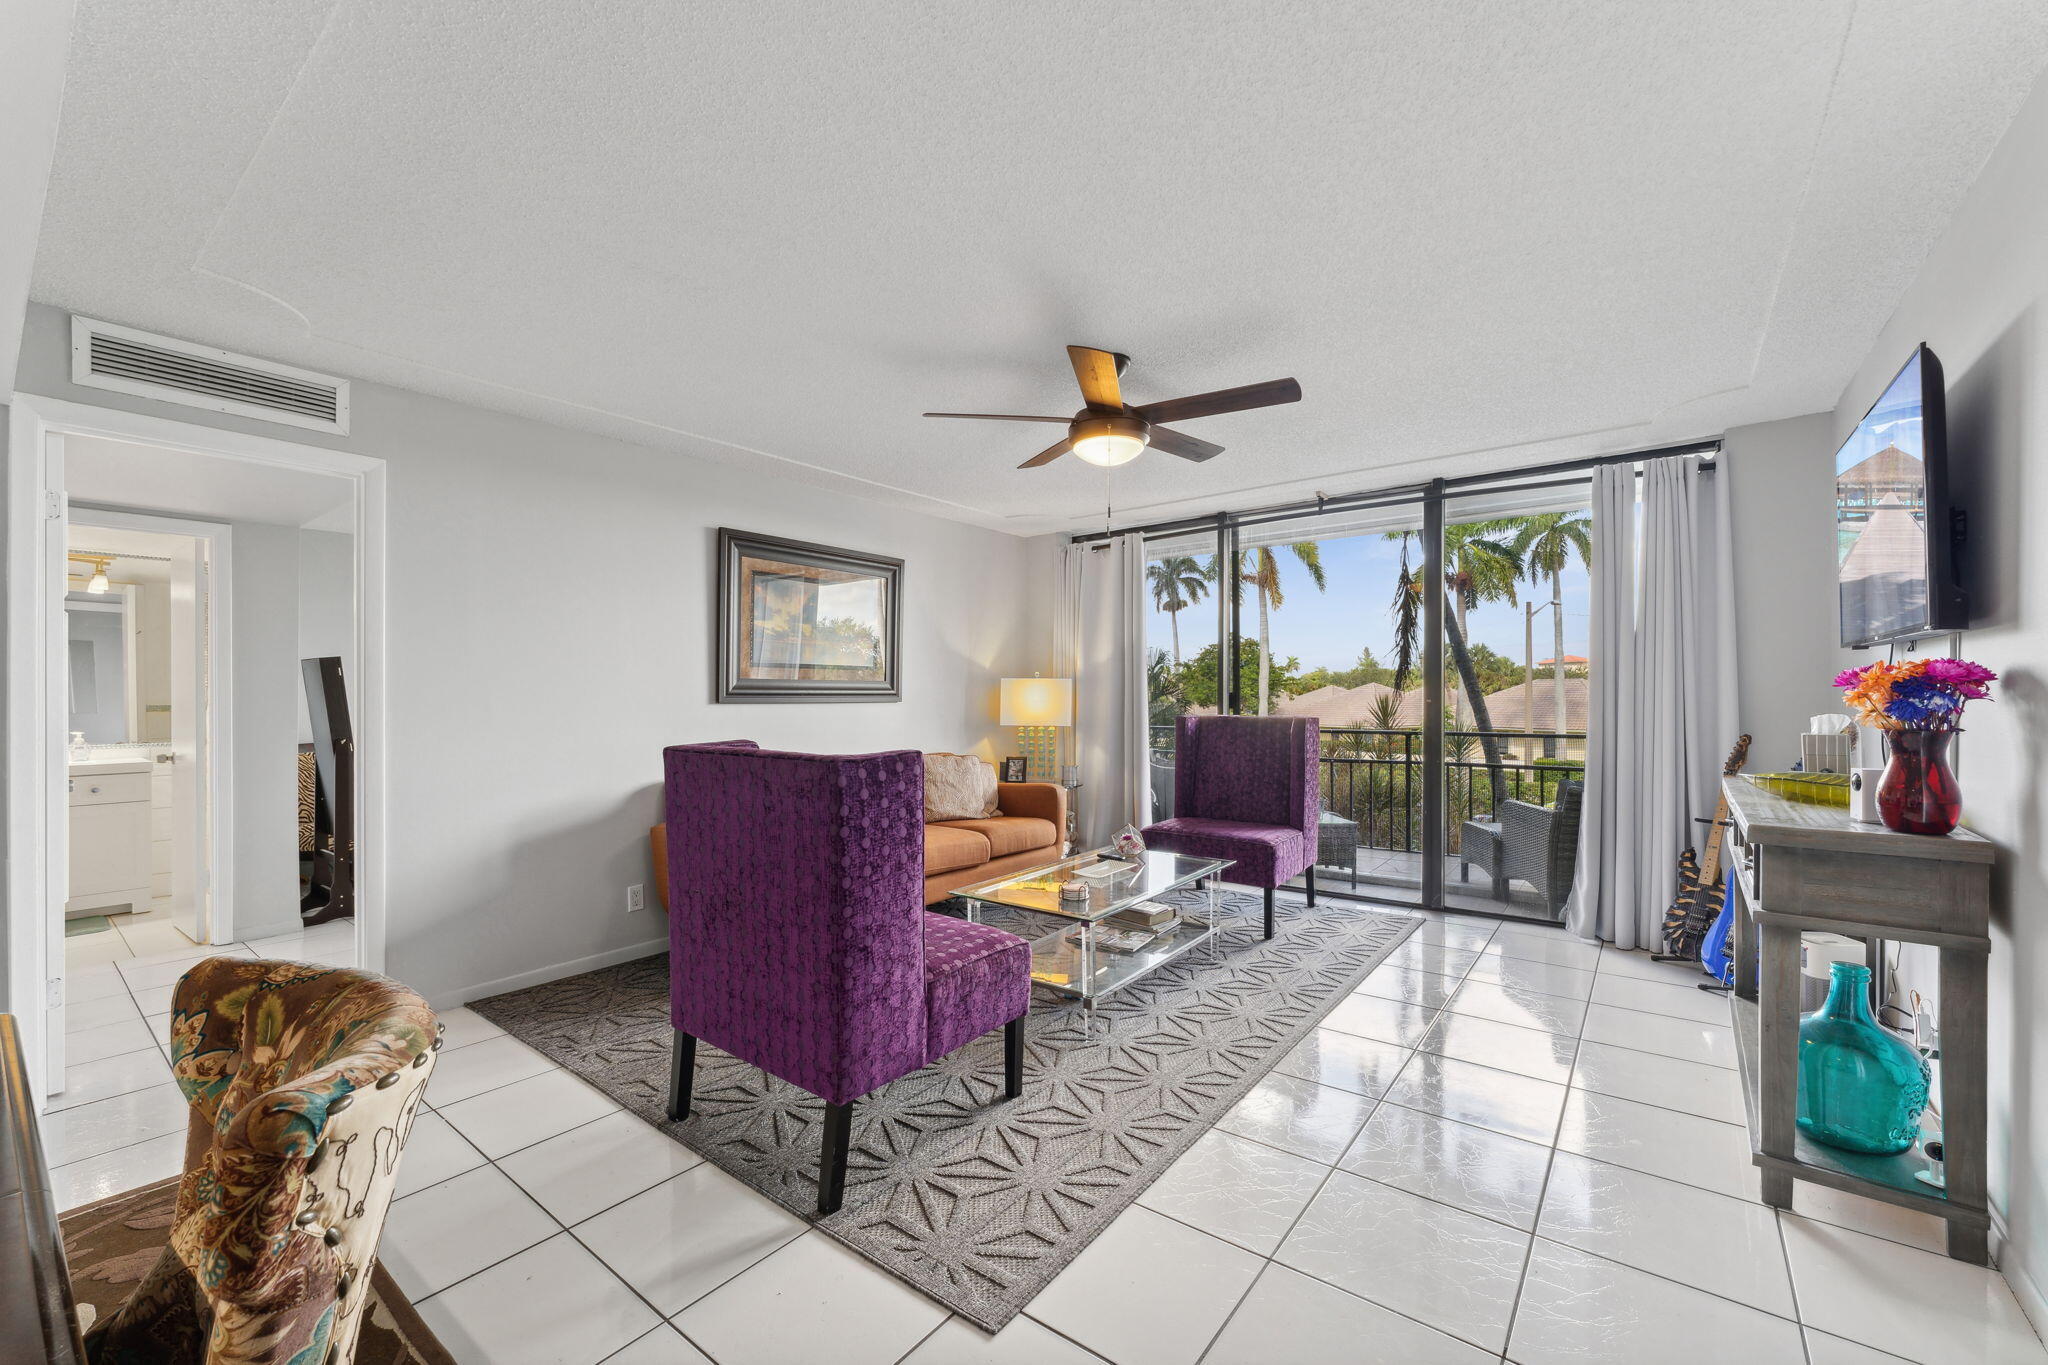 Property for Sale at 1500 Presidential Way 202, West Palm Beach, Palm Beach County, Florida - Bedrooms: 2 
Bathrooms: 2  - $209,000